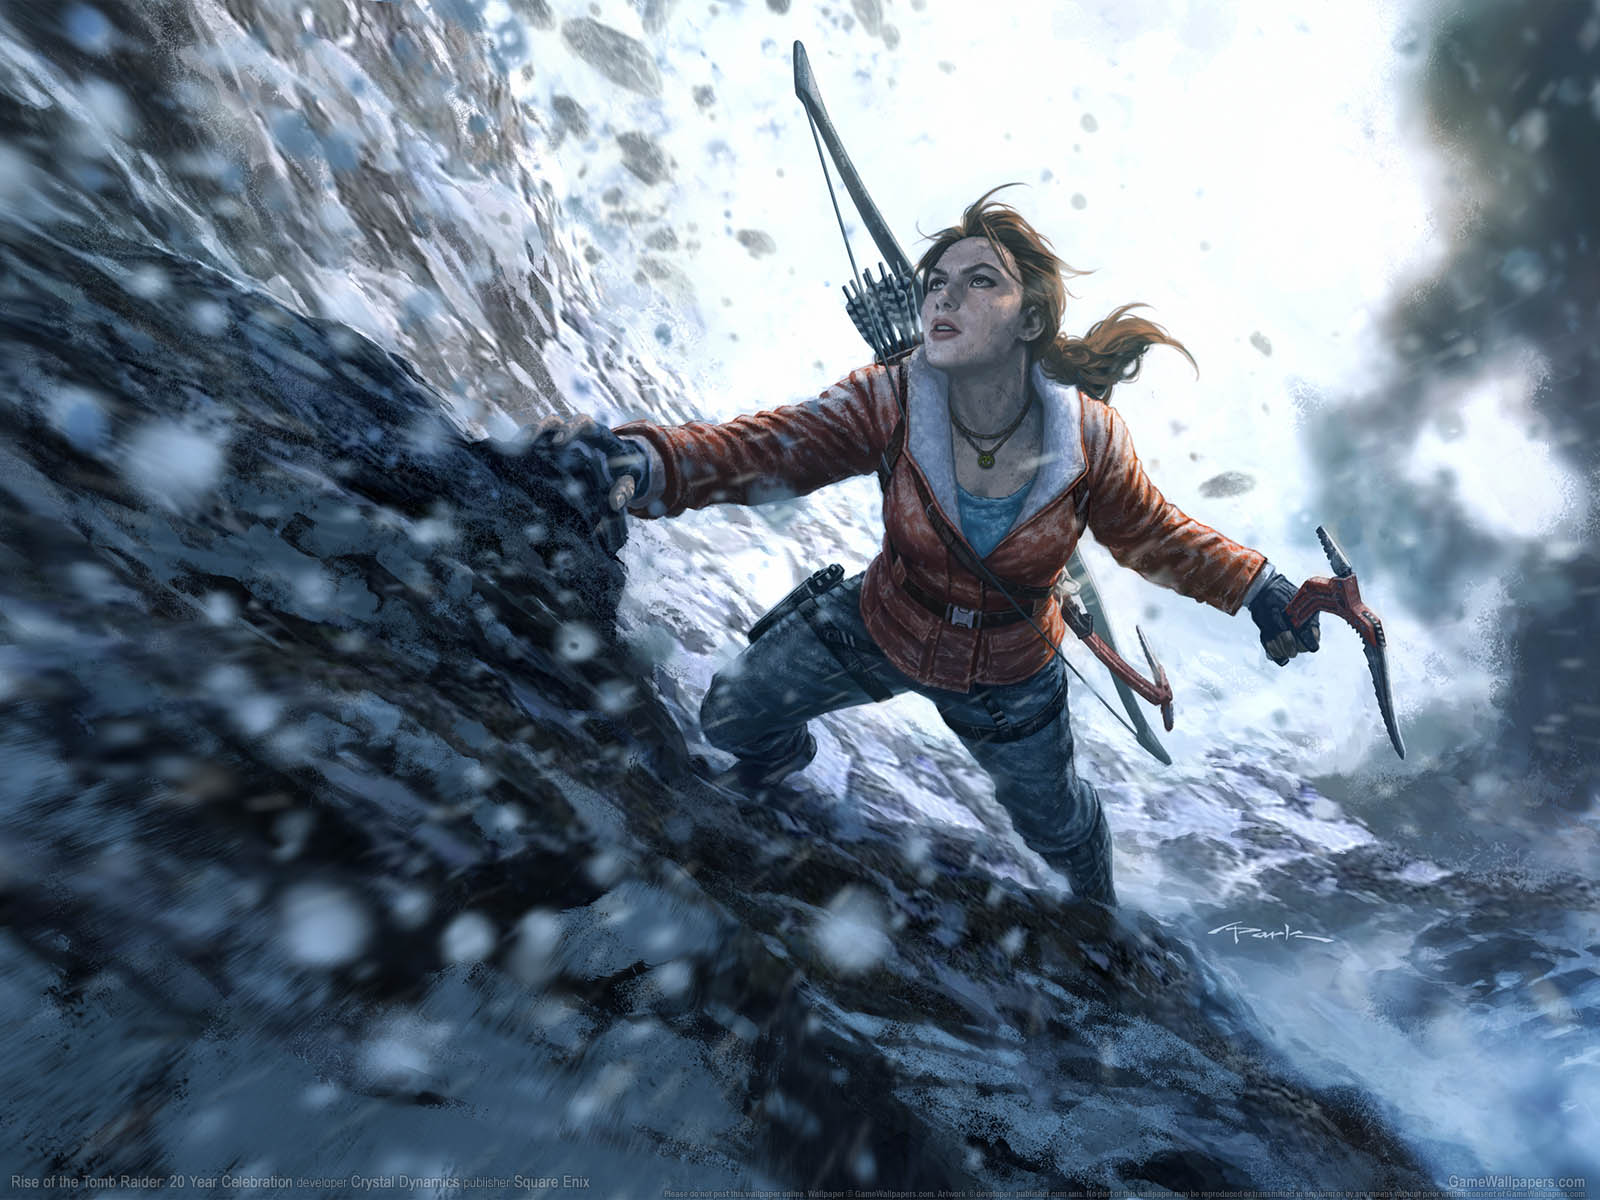 Rise of the Tomb Raider%2525253A 20 Year Celebration wallpaper 02 1600x1200